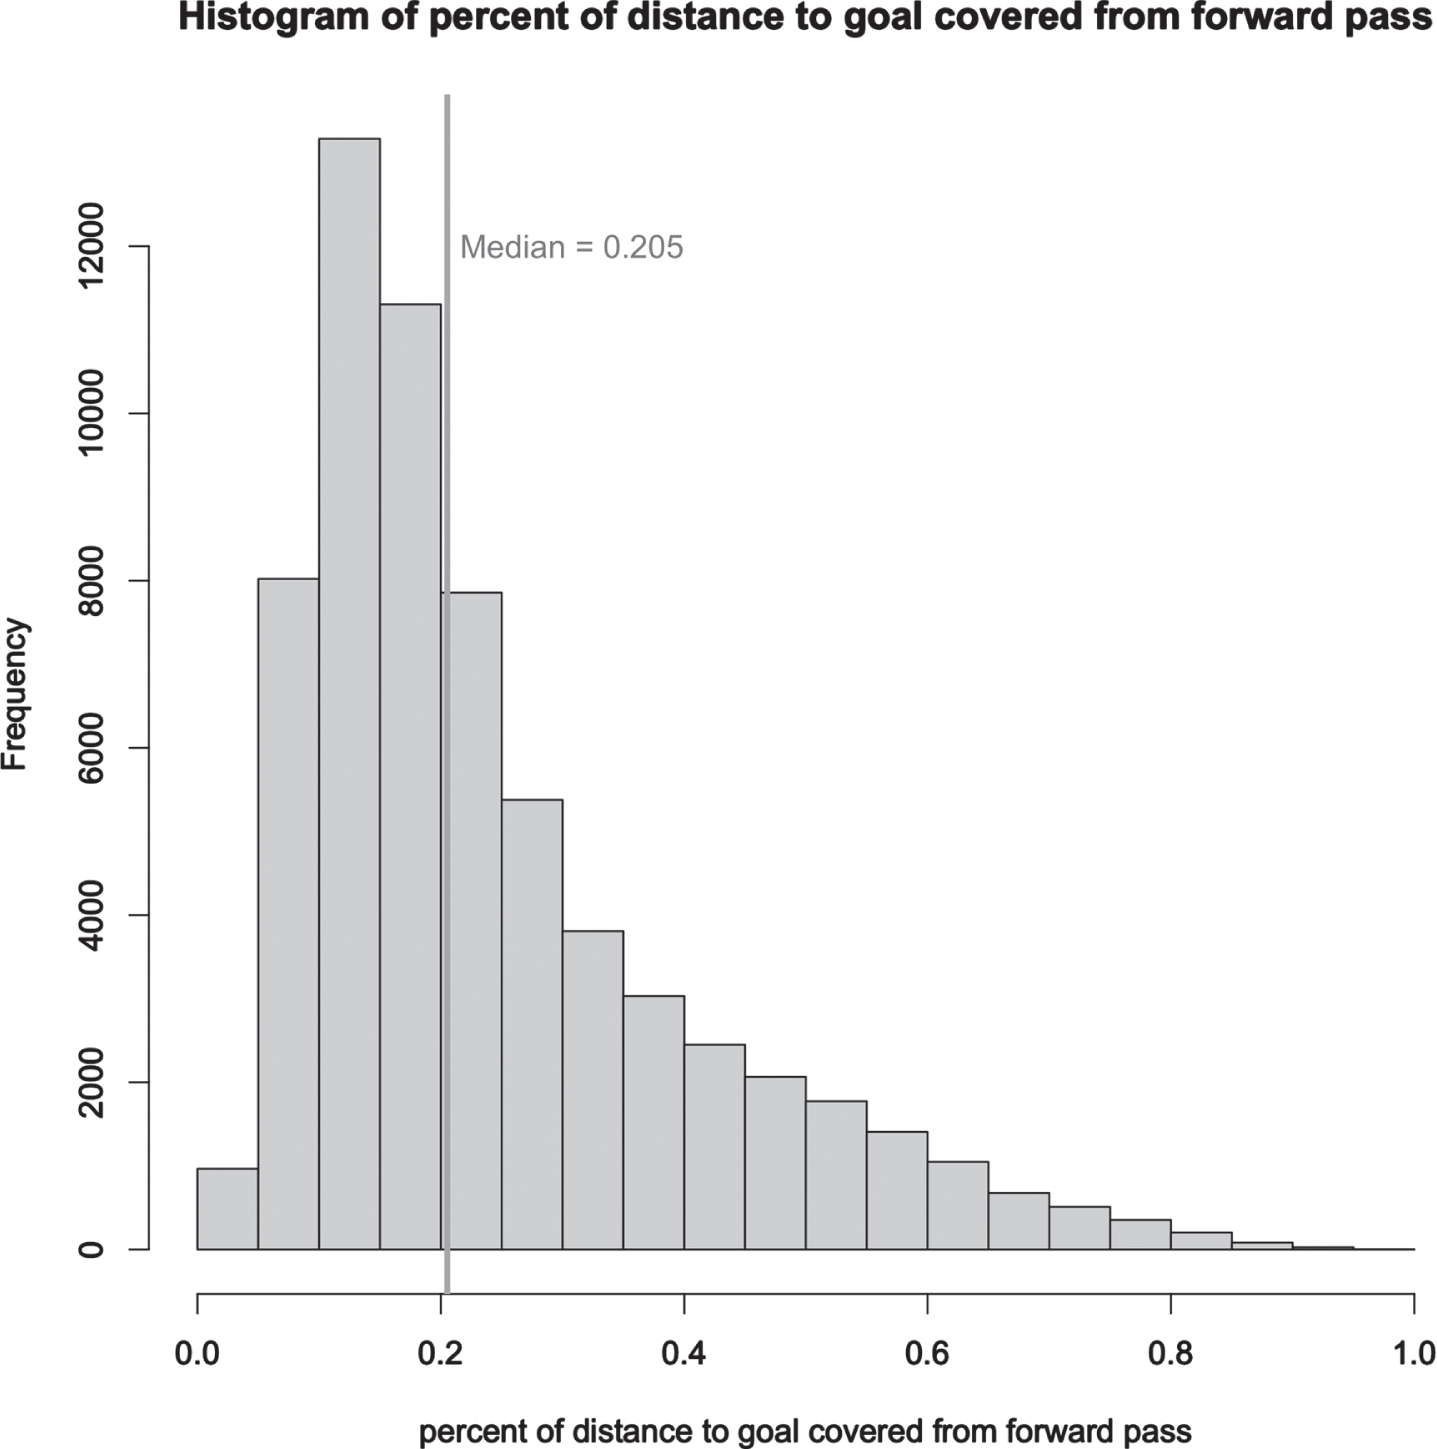 A Histogram displaying the percent of distance to goal covered from forward passes.